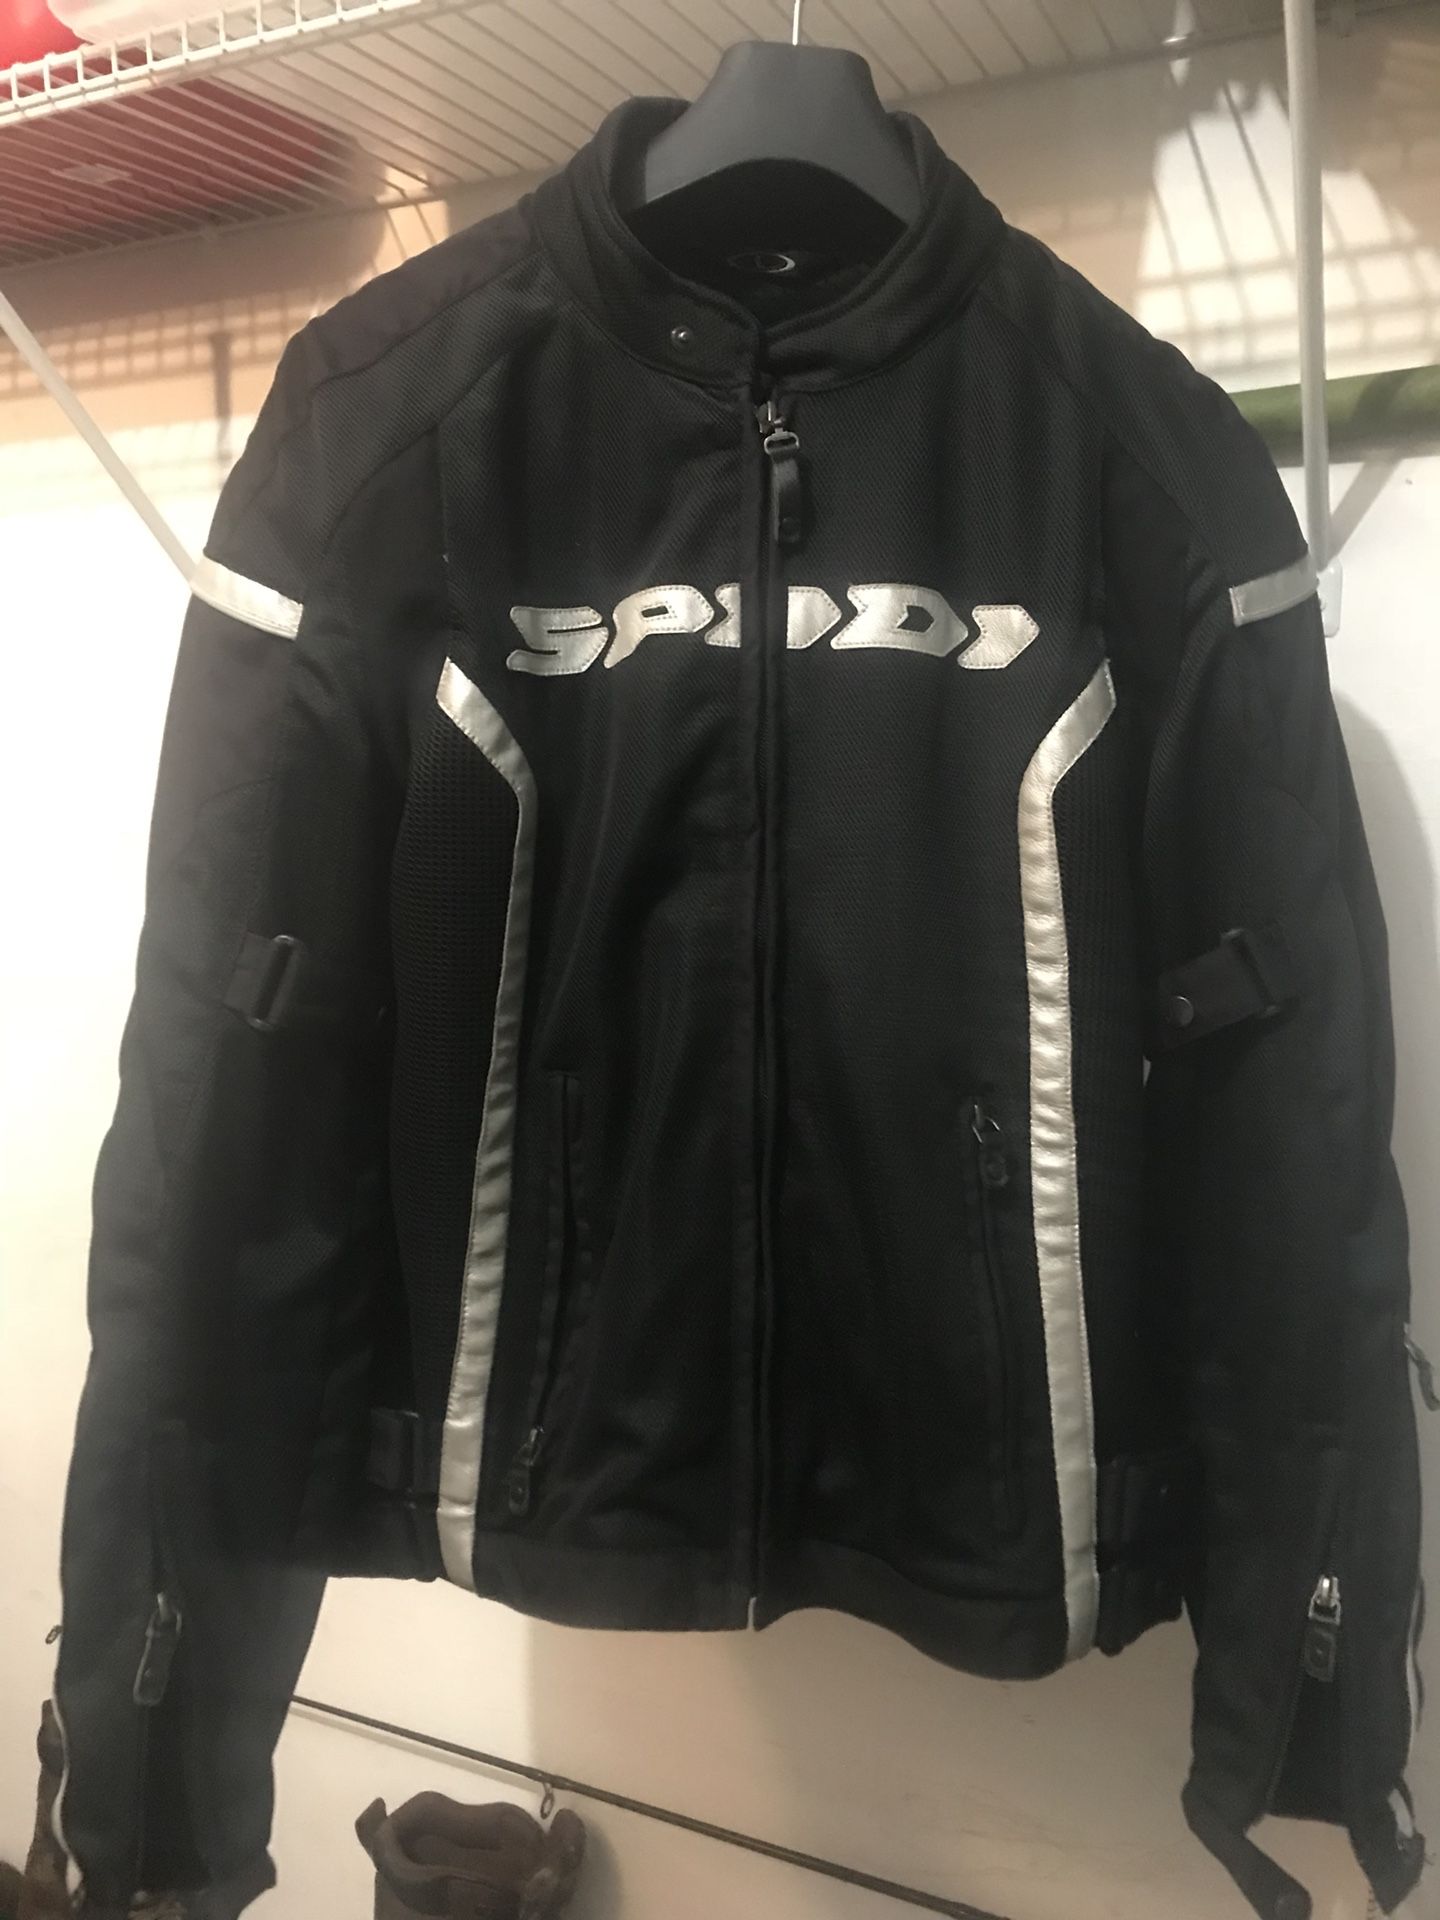 SPIDI Motorcycle Jacket. Very Comfortable with Protector paddings inside. Excellent condition.